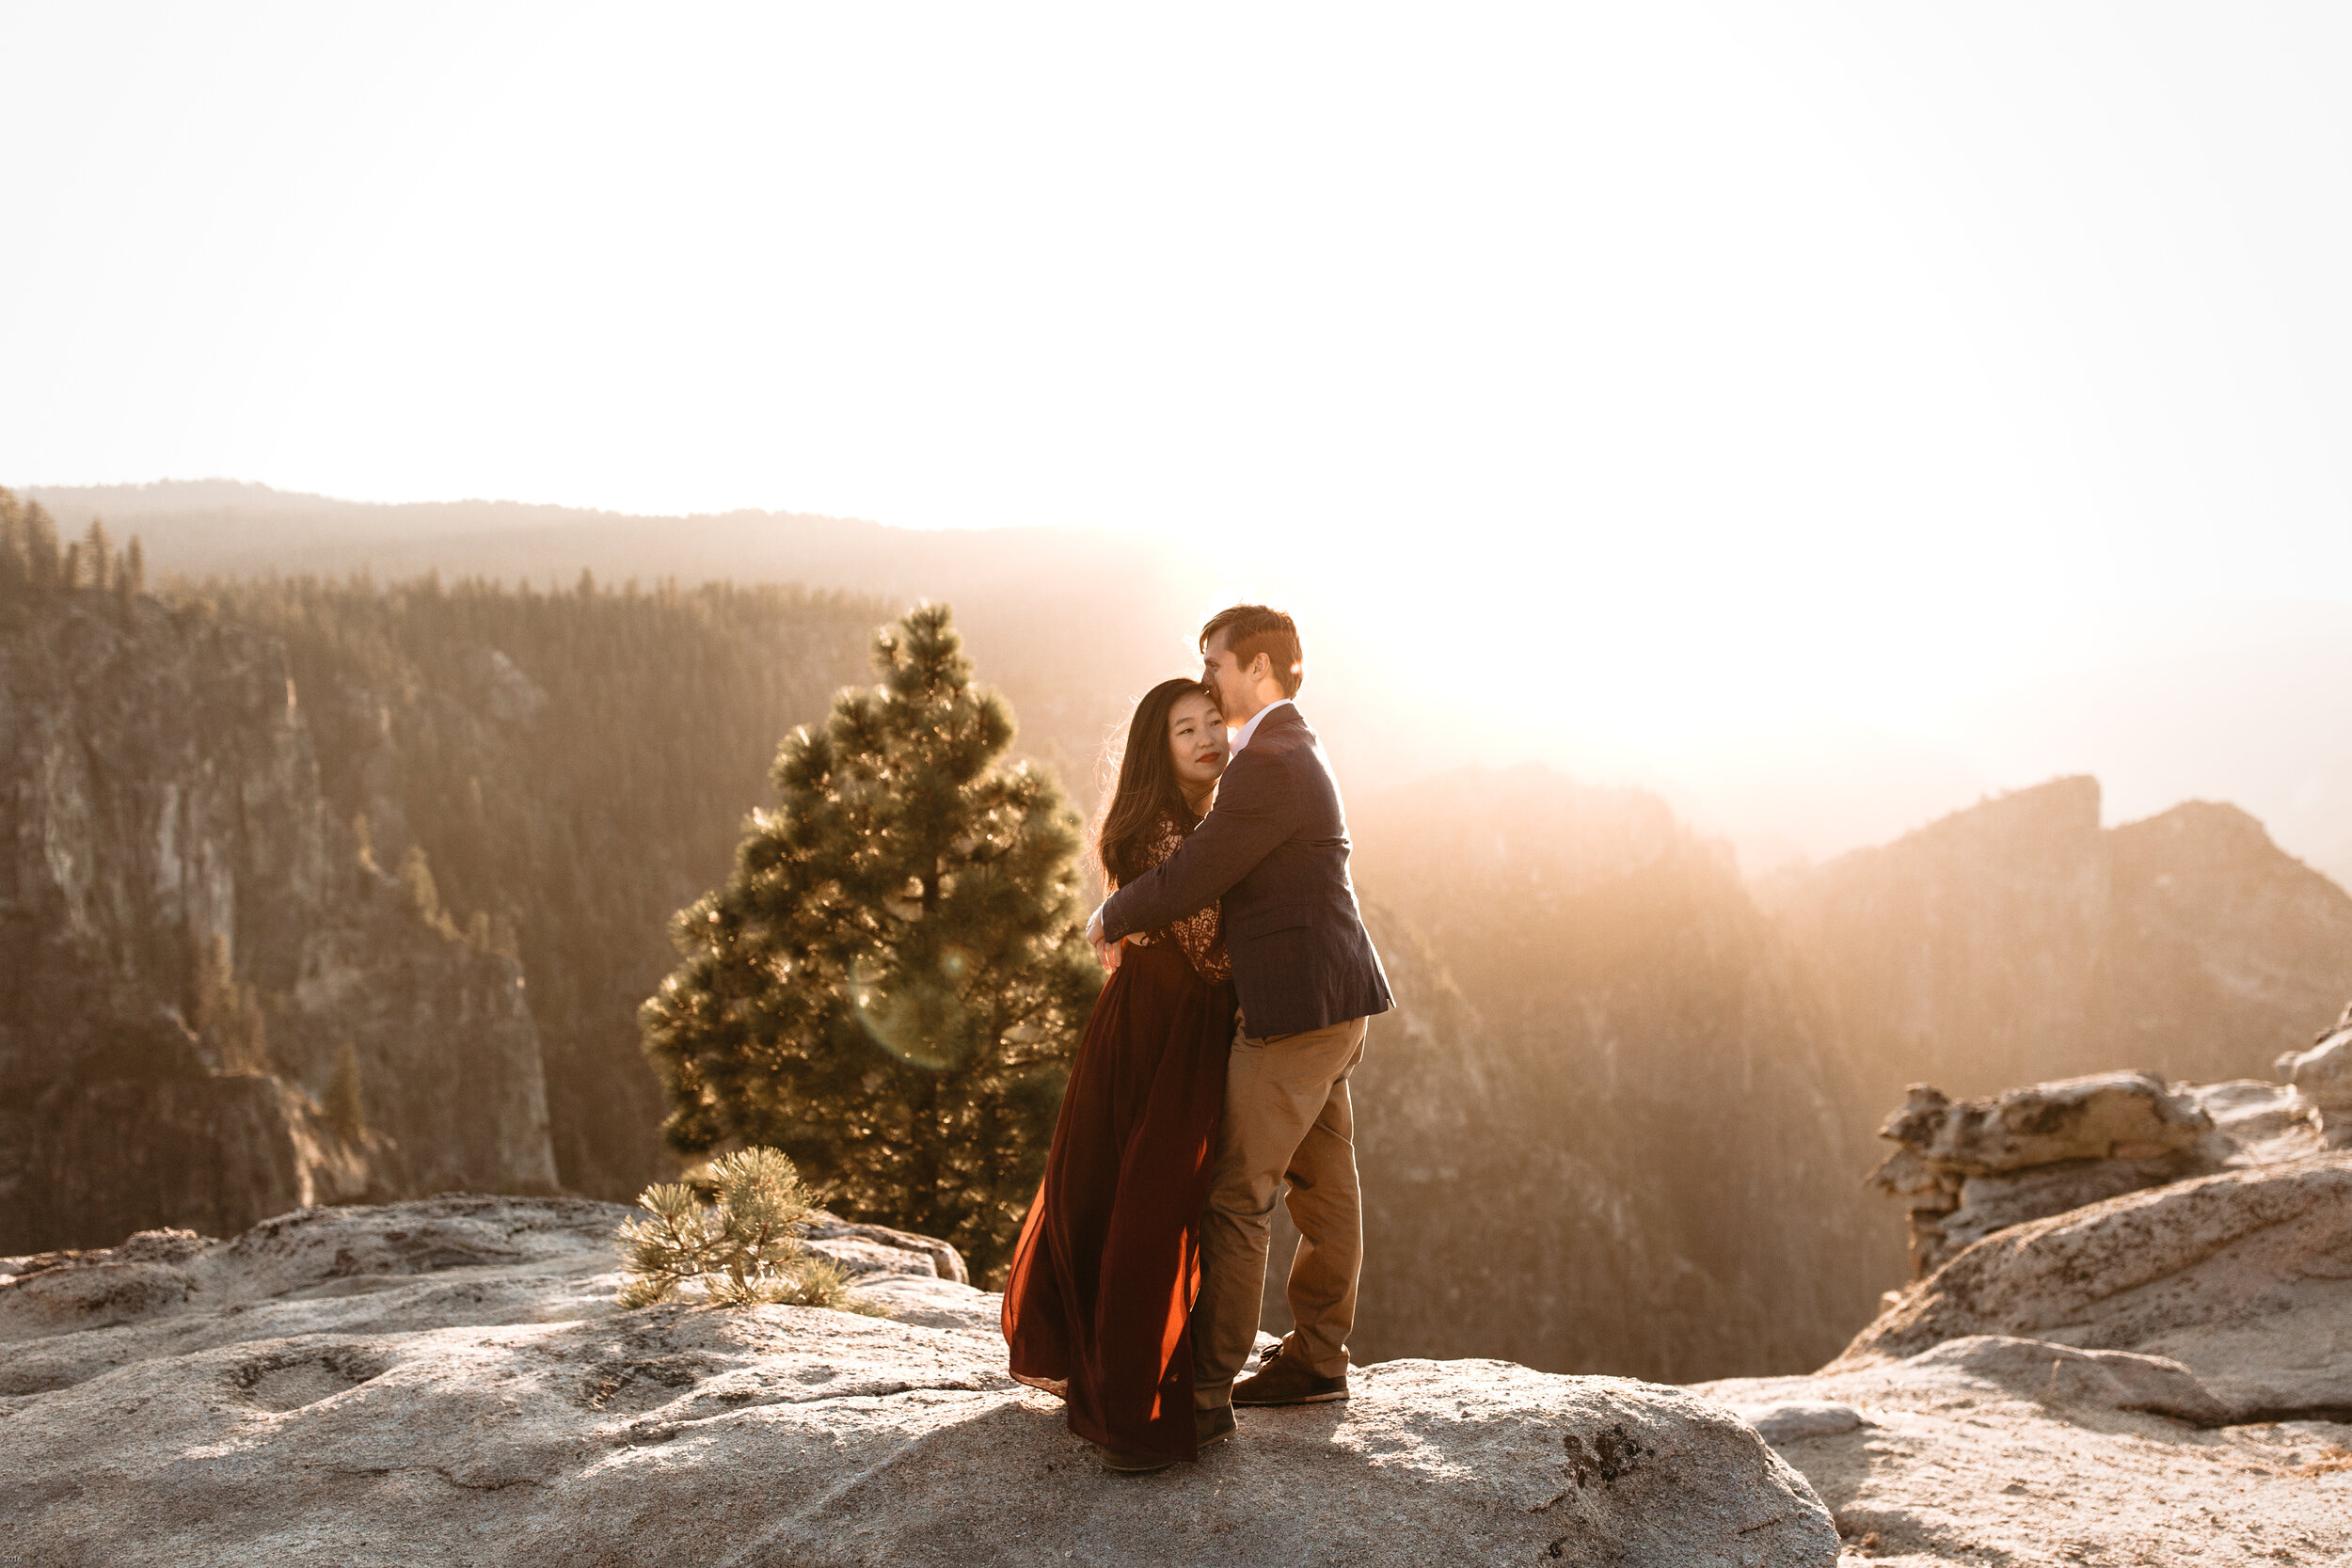 yosemite-national-park-couples-session-at-taft-point-and-yosemite-valley-yosemite-elopement-photographer-nicole-daacke-photography-143.jpg